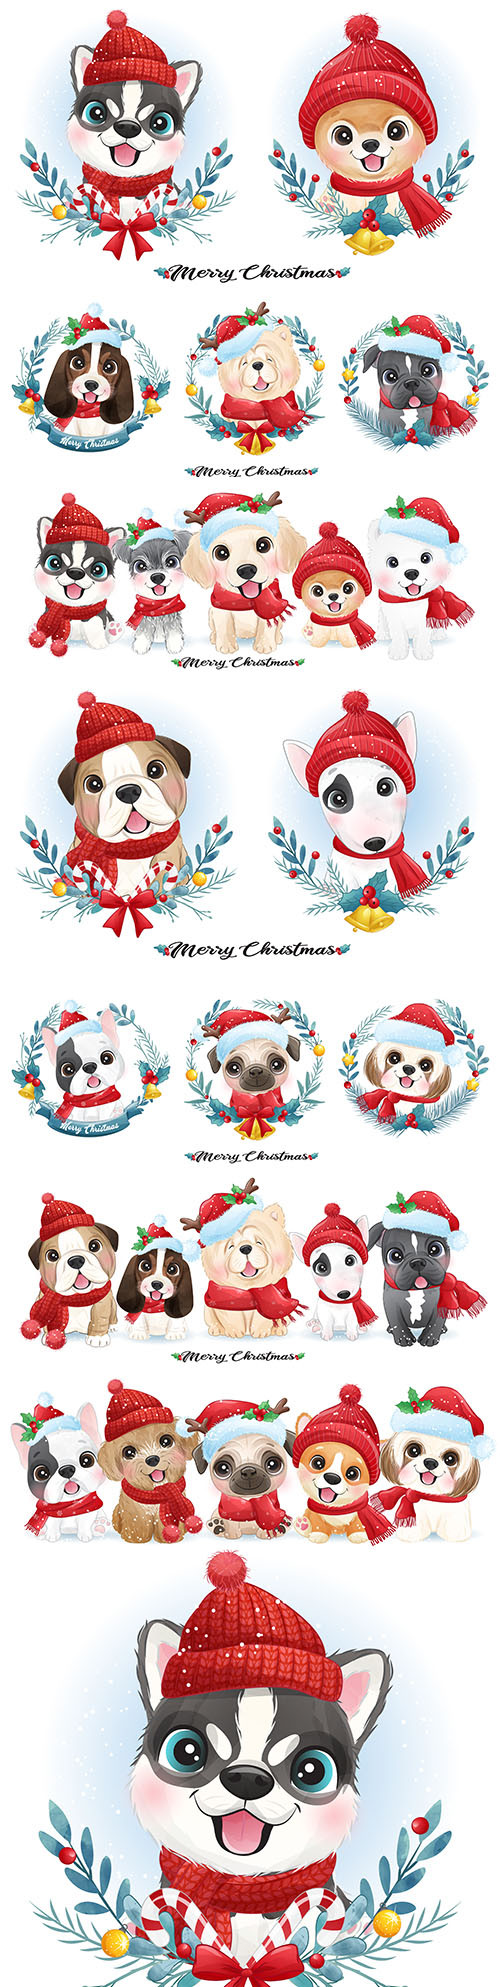 Cute puppy Christmas with watercolor illustration
